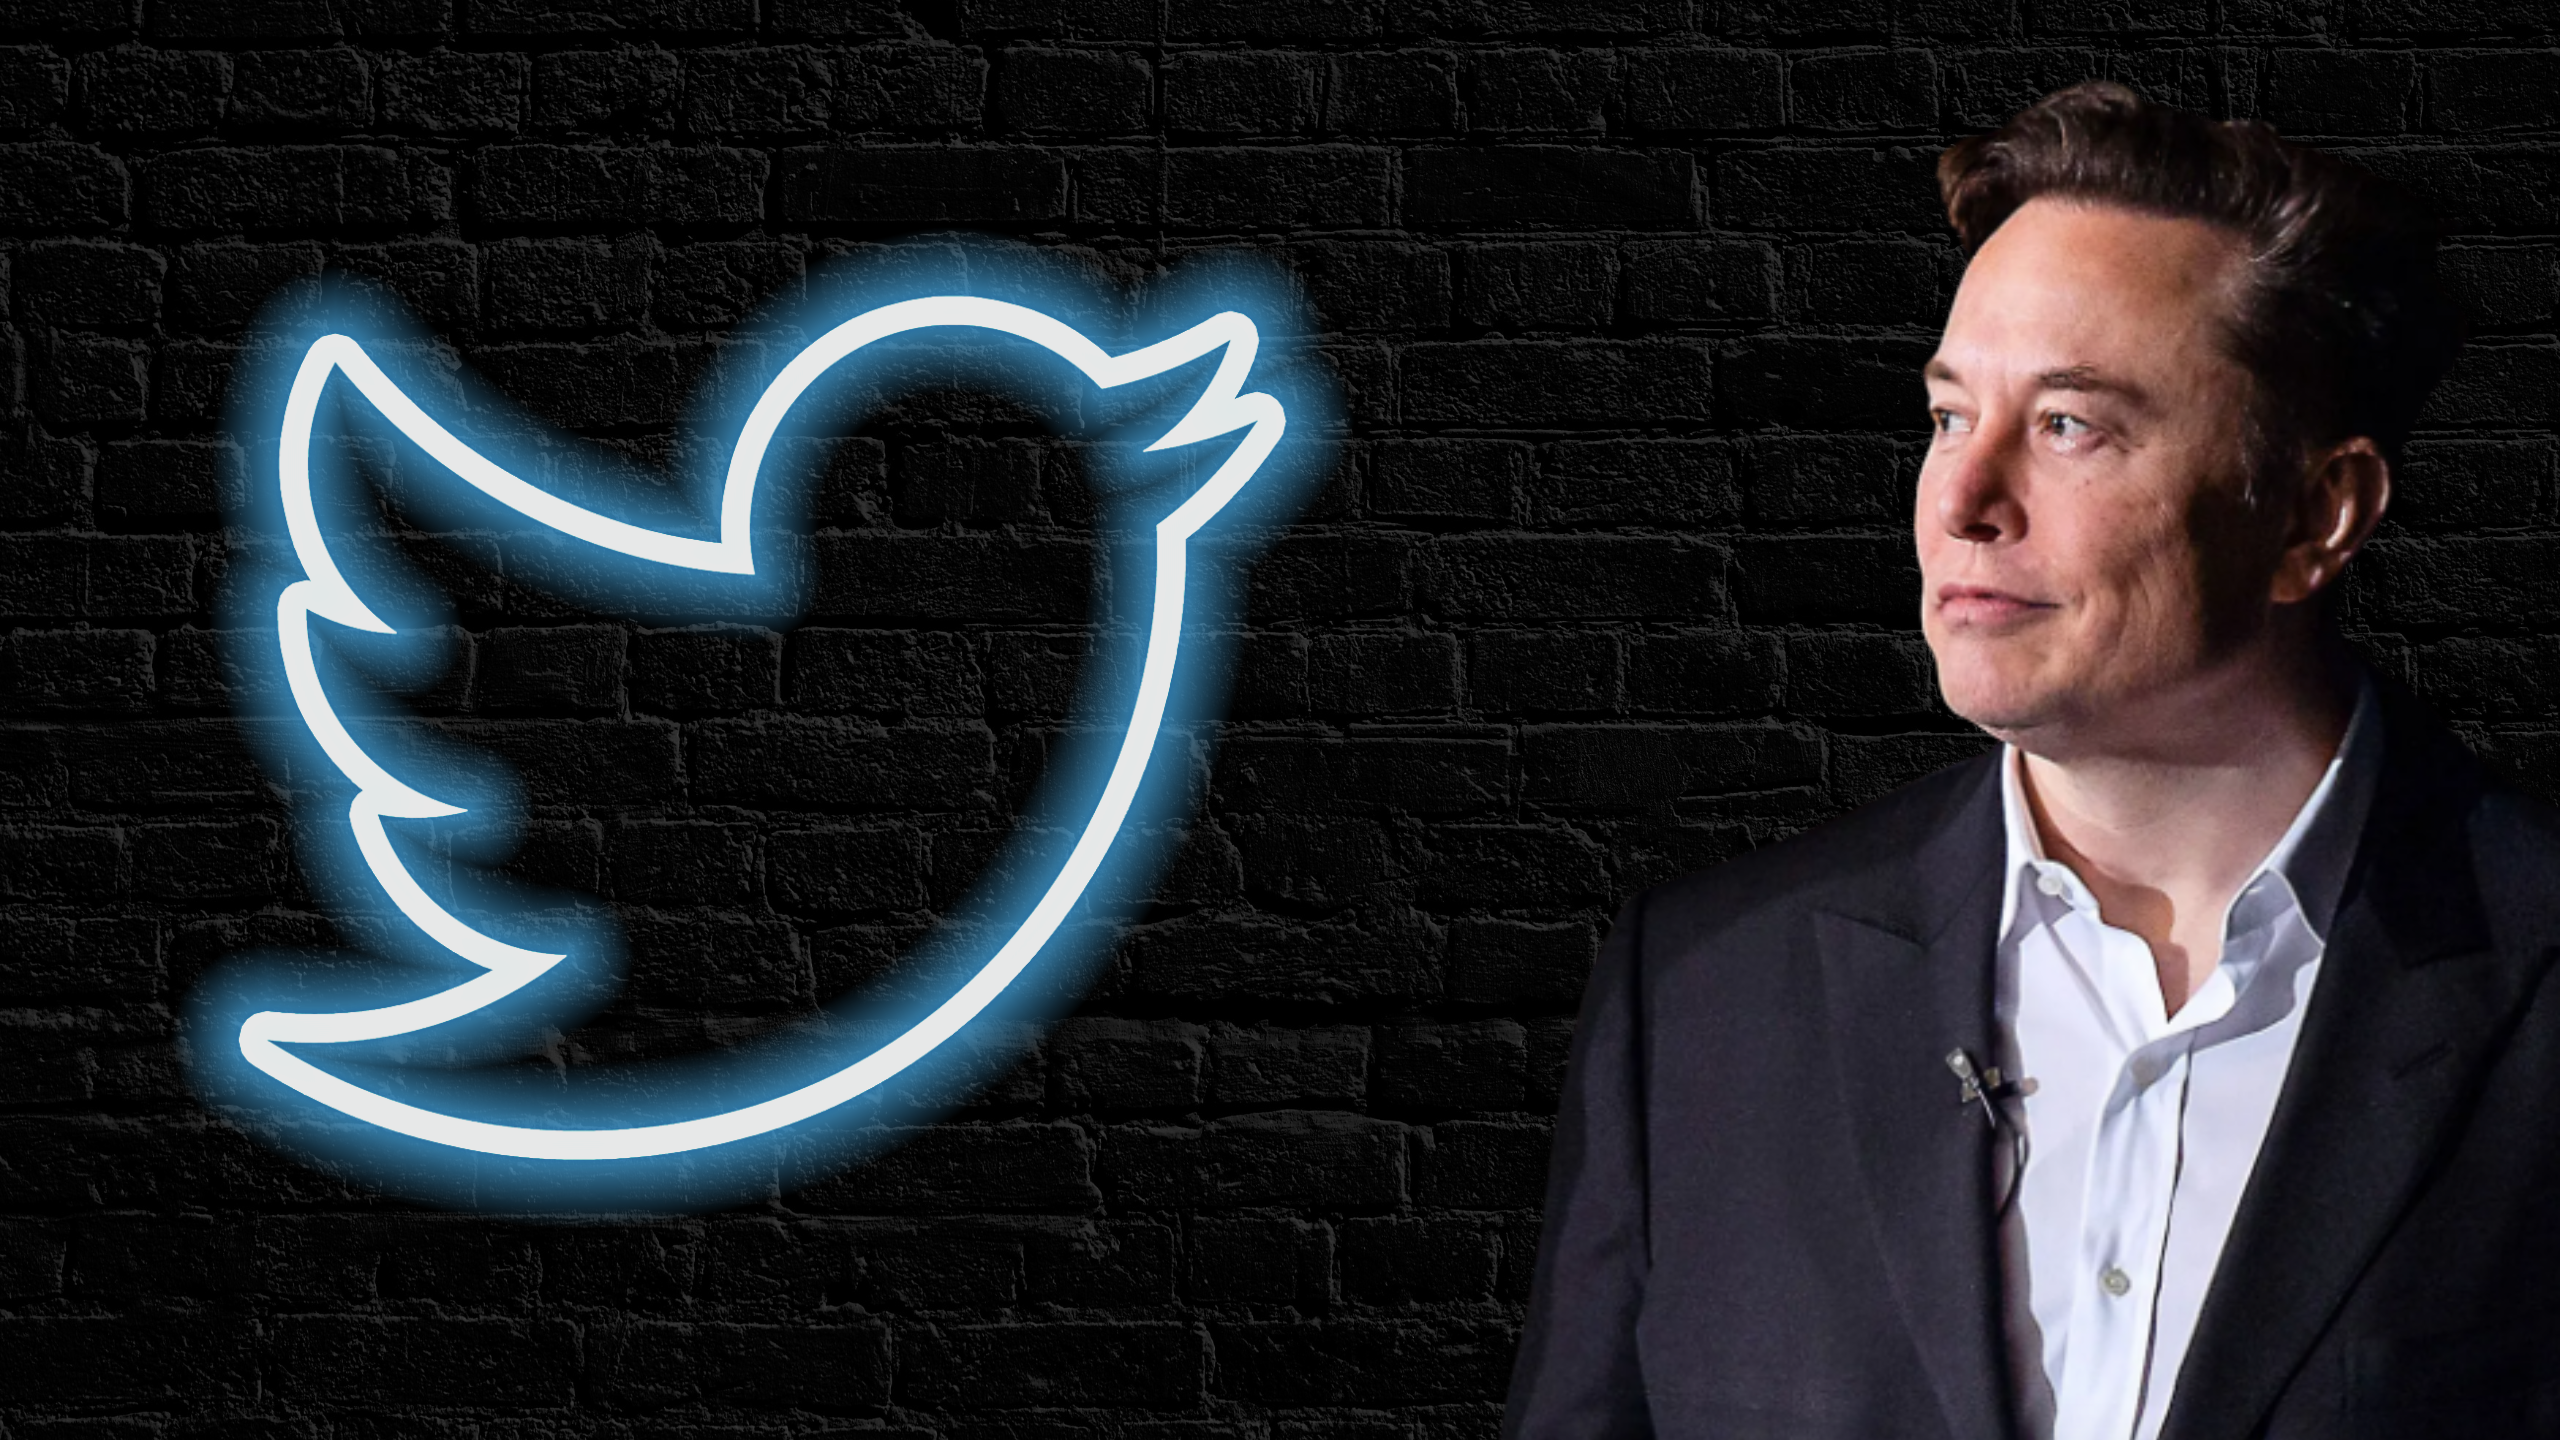 Which is worse for Twitter advertisers- child sexual exploitation or Elon Musk?